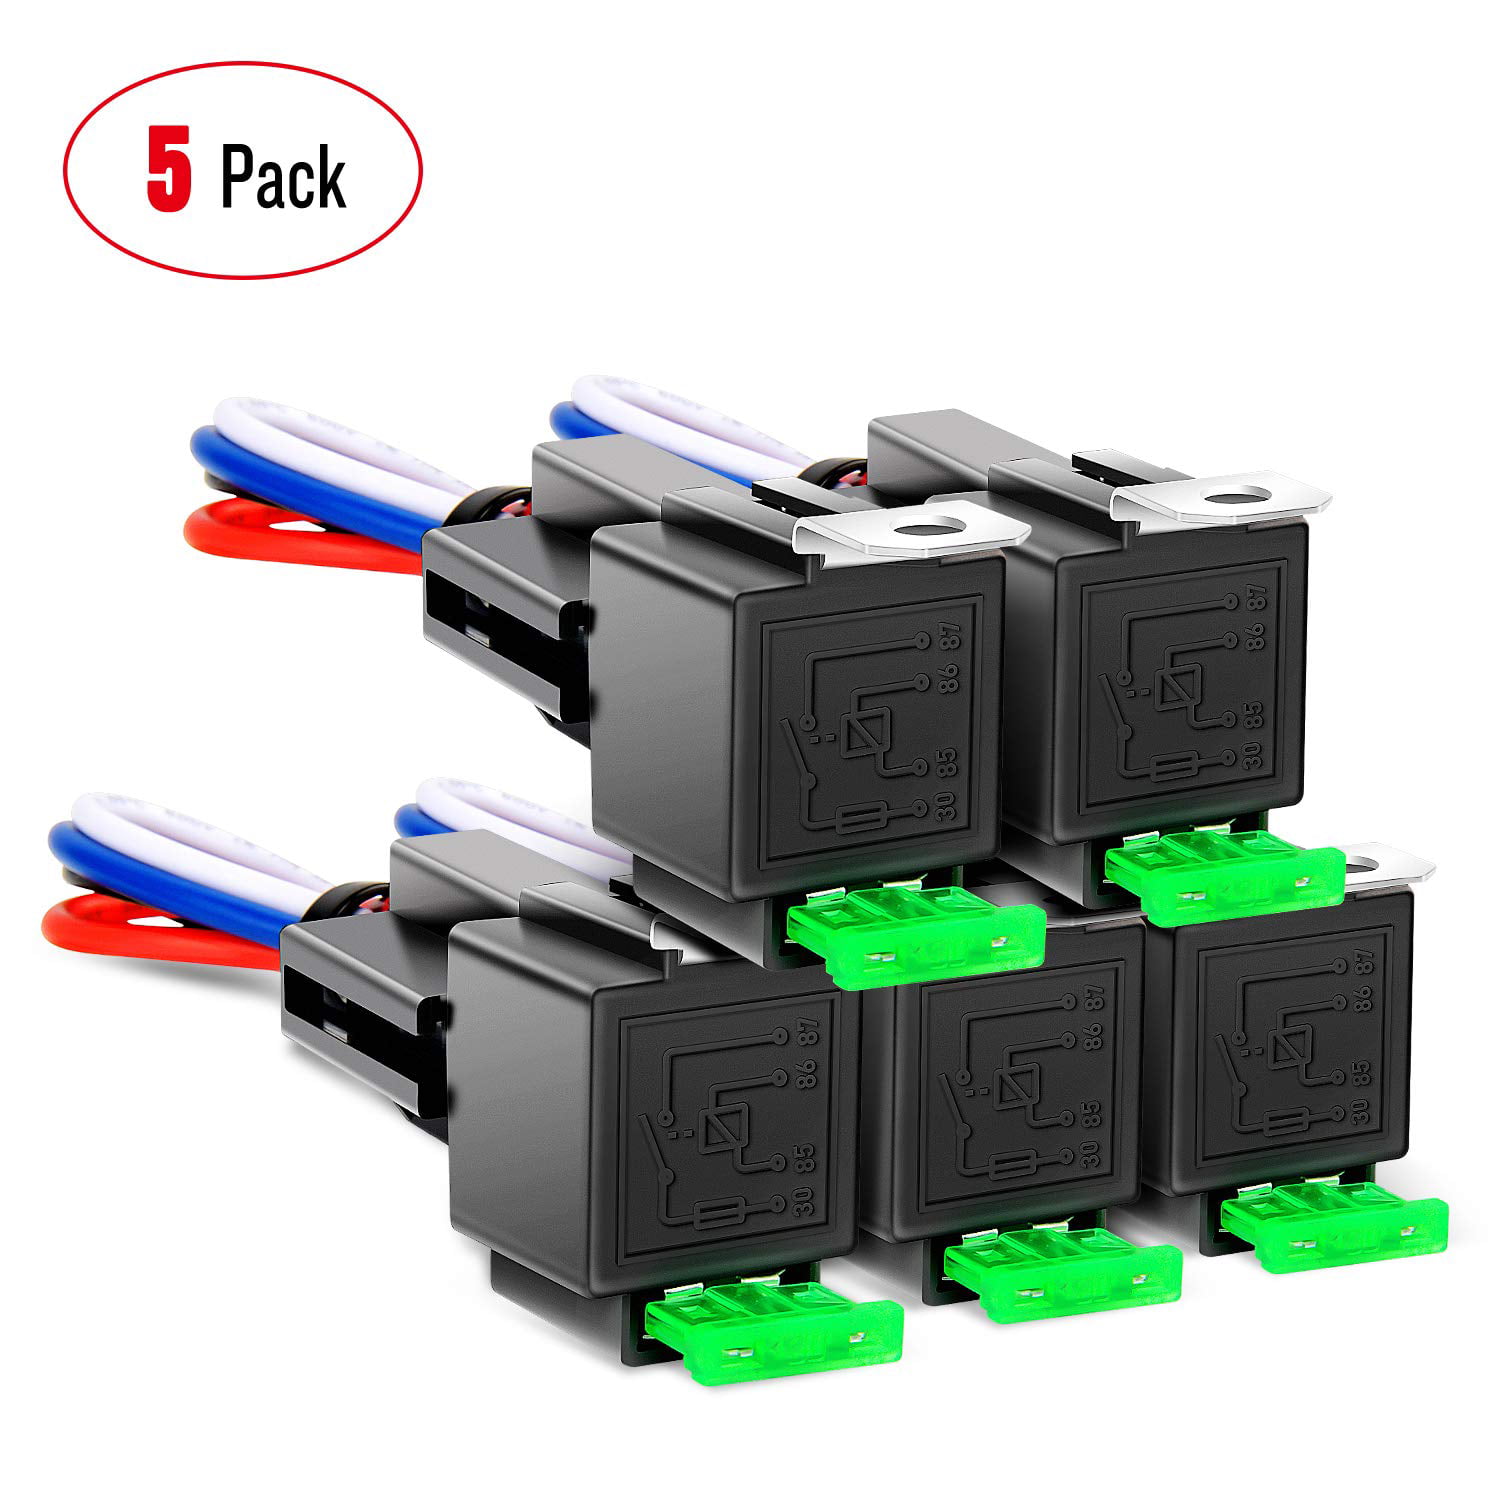 Normally Open Contacts Fused Relay DC 12V 30A Fused Relay,Black 4-Pin Fuse Relay Box with Bracket,for Automotive and Lamp Accessory Applications Car Relay 